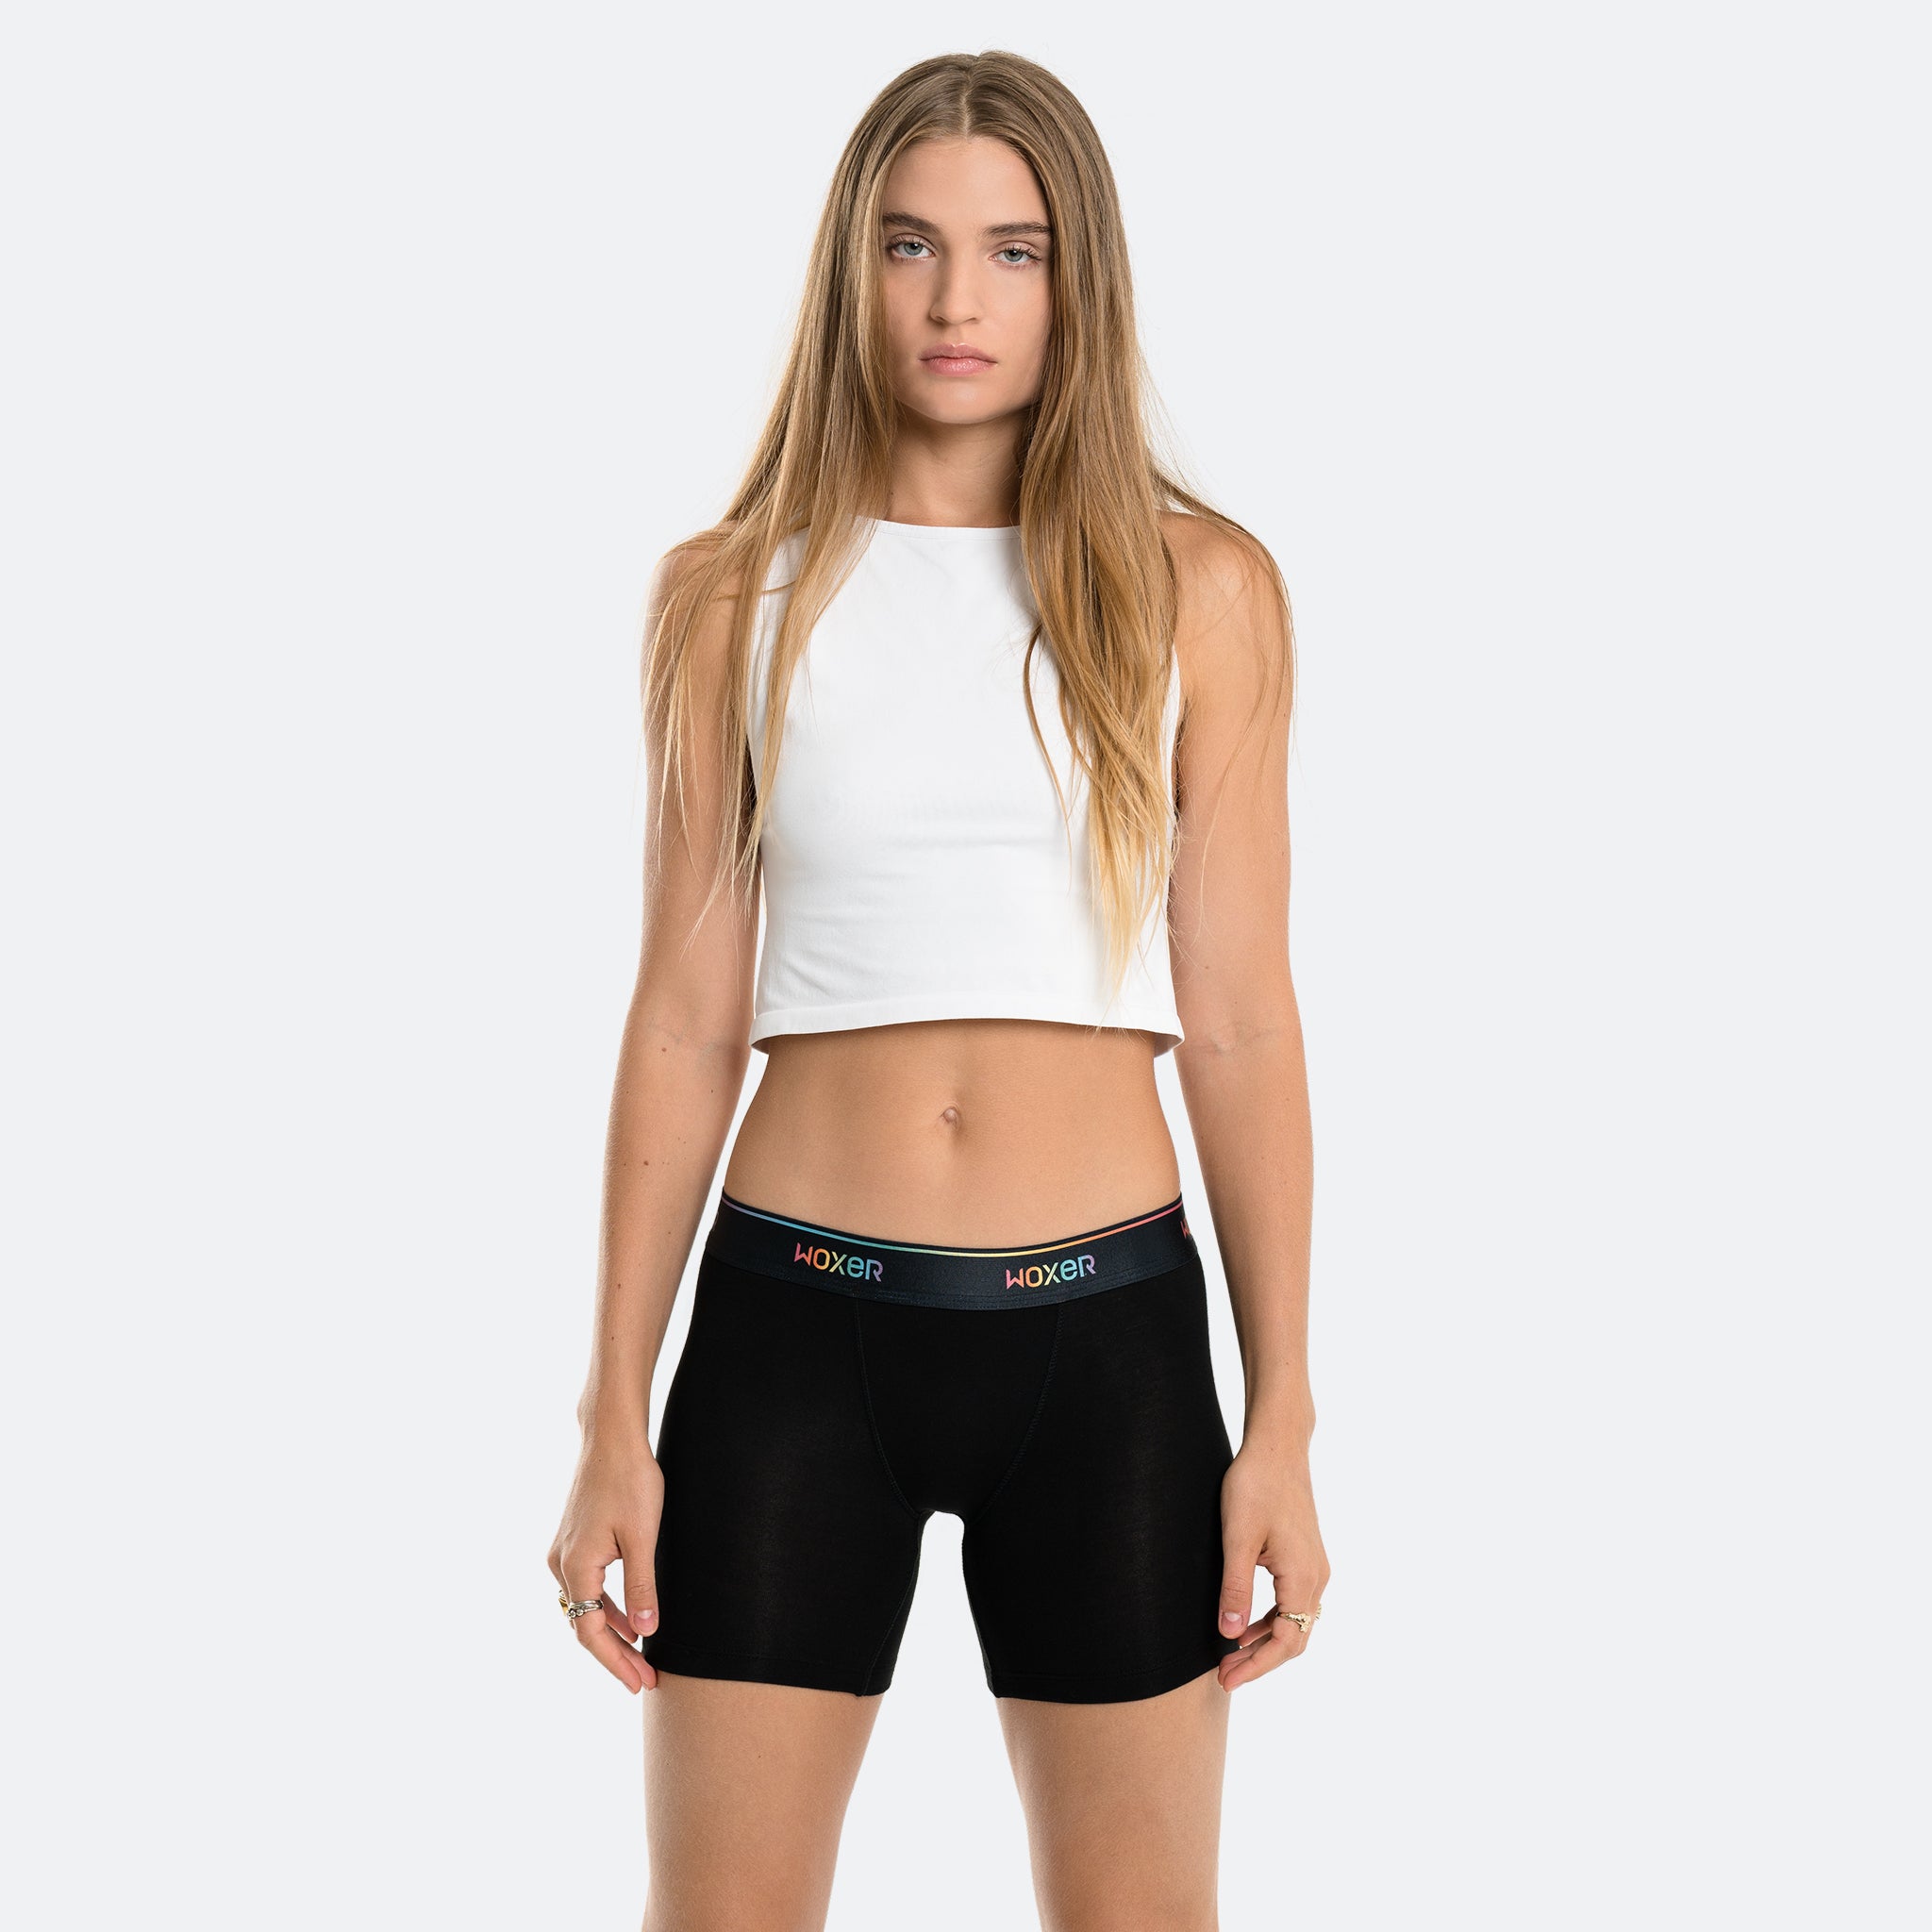 Women's Woxer Breathable Baller Pride 3.0 High Waisted, style# 2 90505,  size 2XL